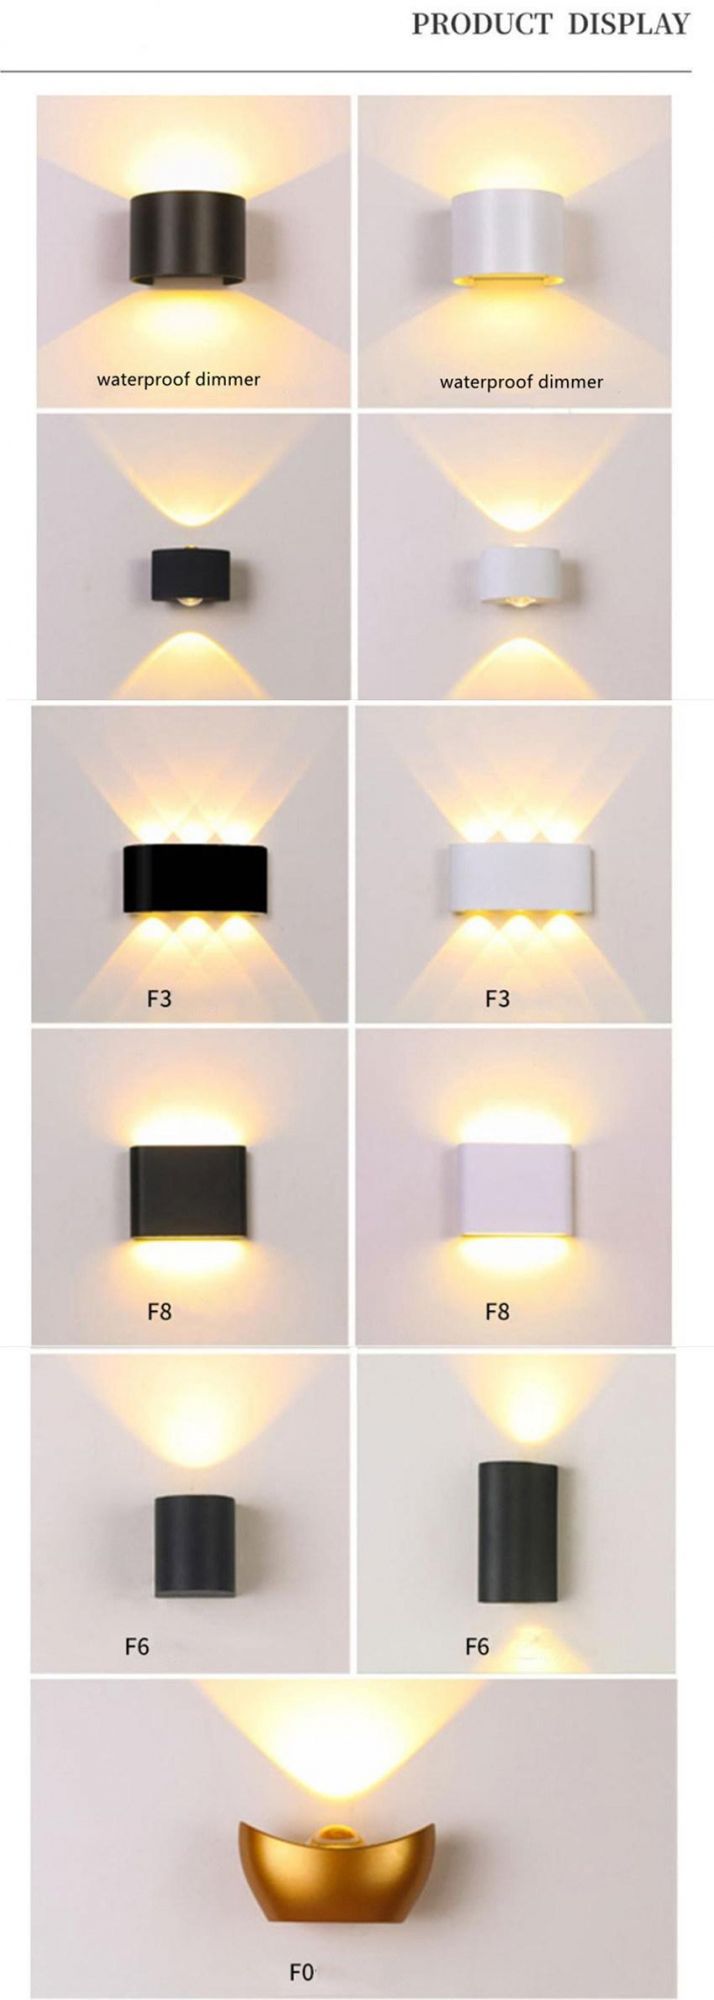 Wholesale Different Styles of Outdoor Dimming Wall Lamp Waterproof Outdoor Patio Table Lamp